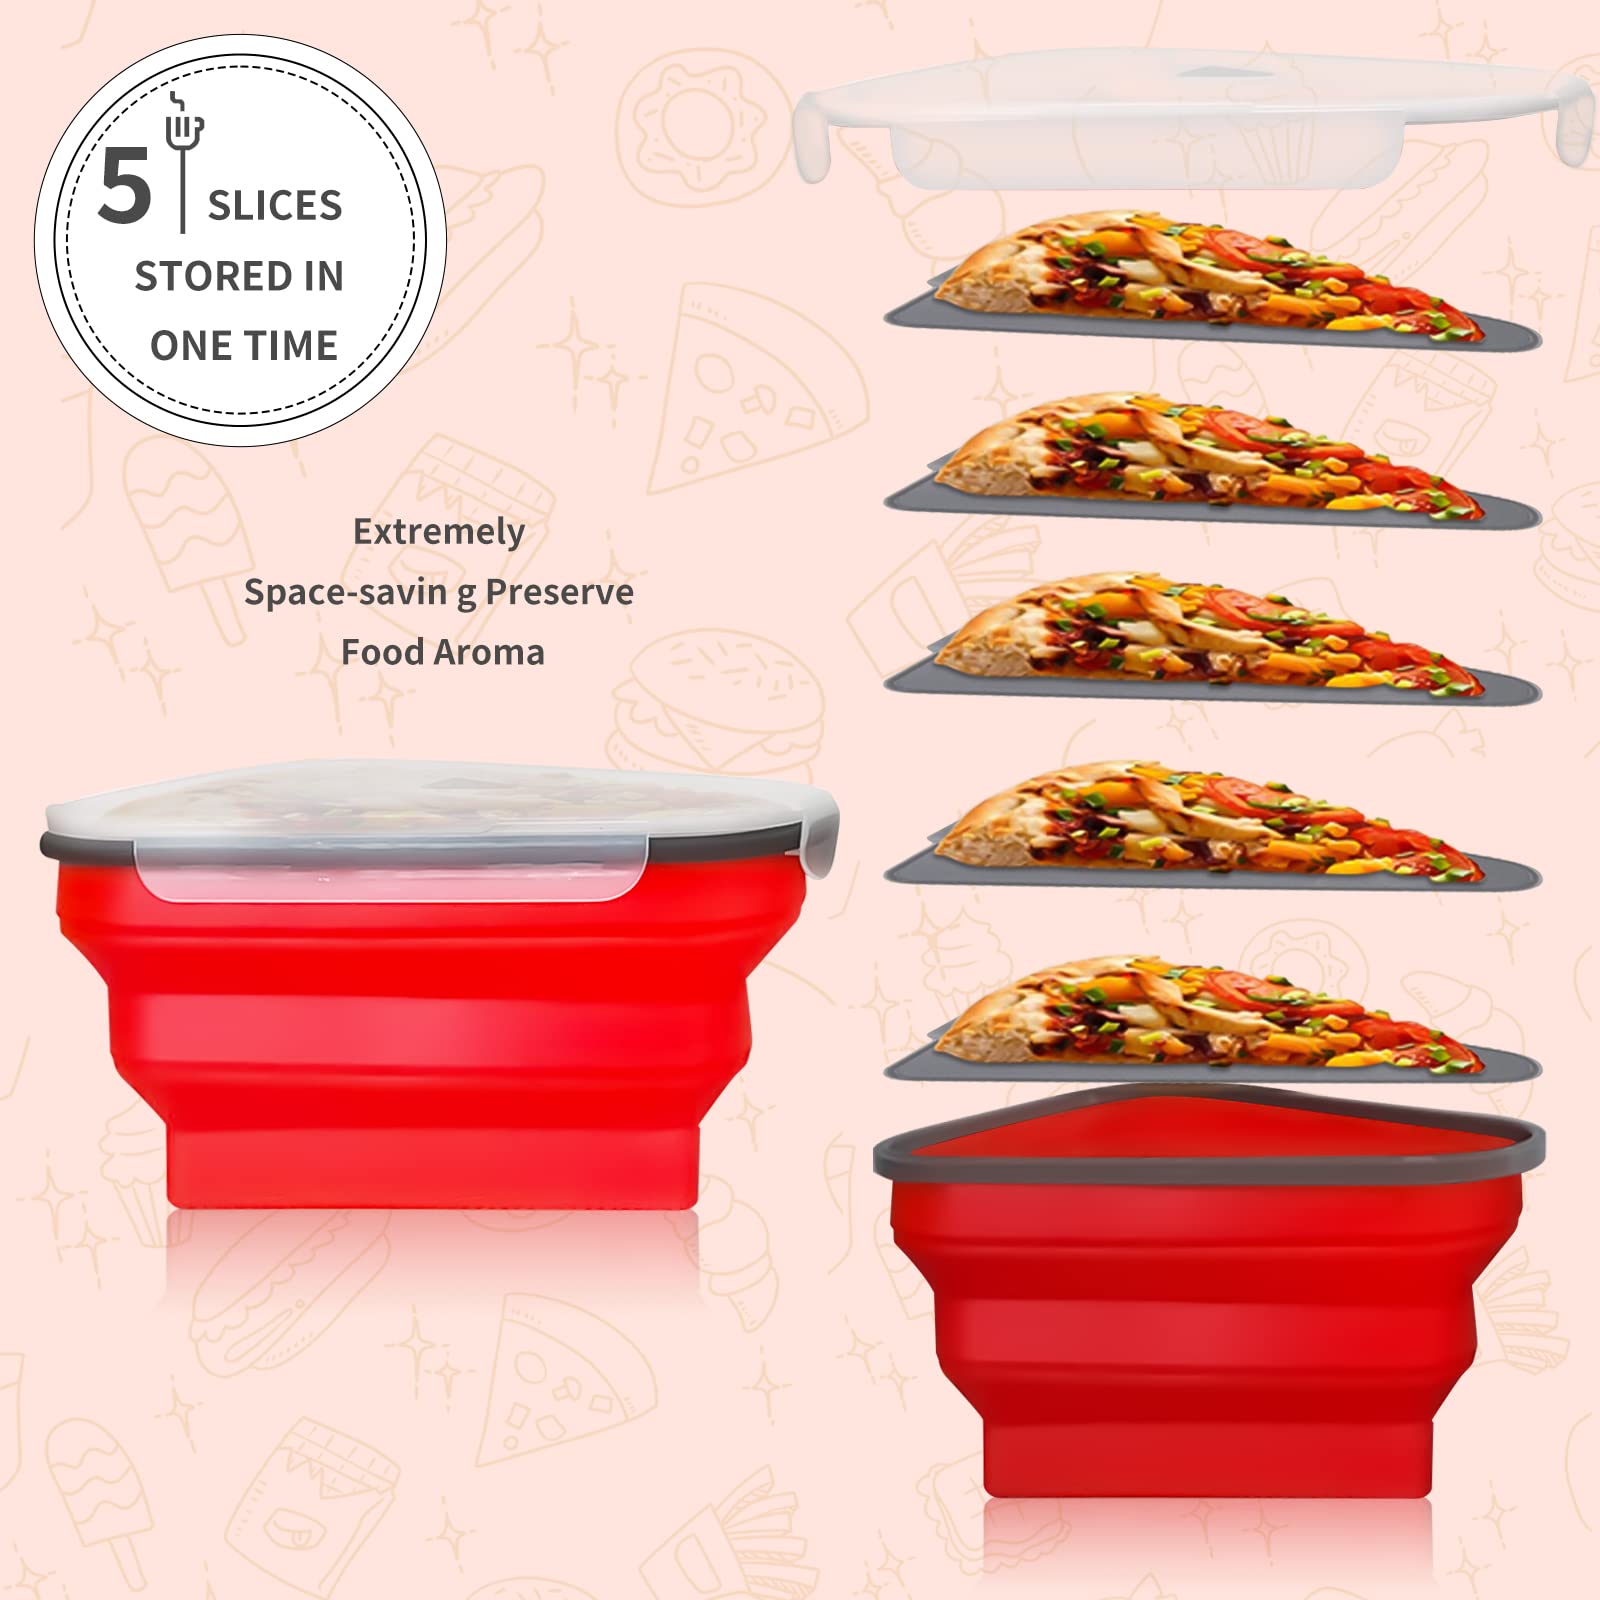 Kasalida Leftover Pizza Storage Container Pizza Container Expandable with 5 Microwavable Serving Trays Dishwasher Safe BPA Free and Microwave Friendly (Red)